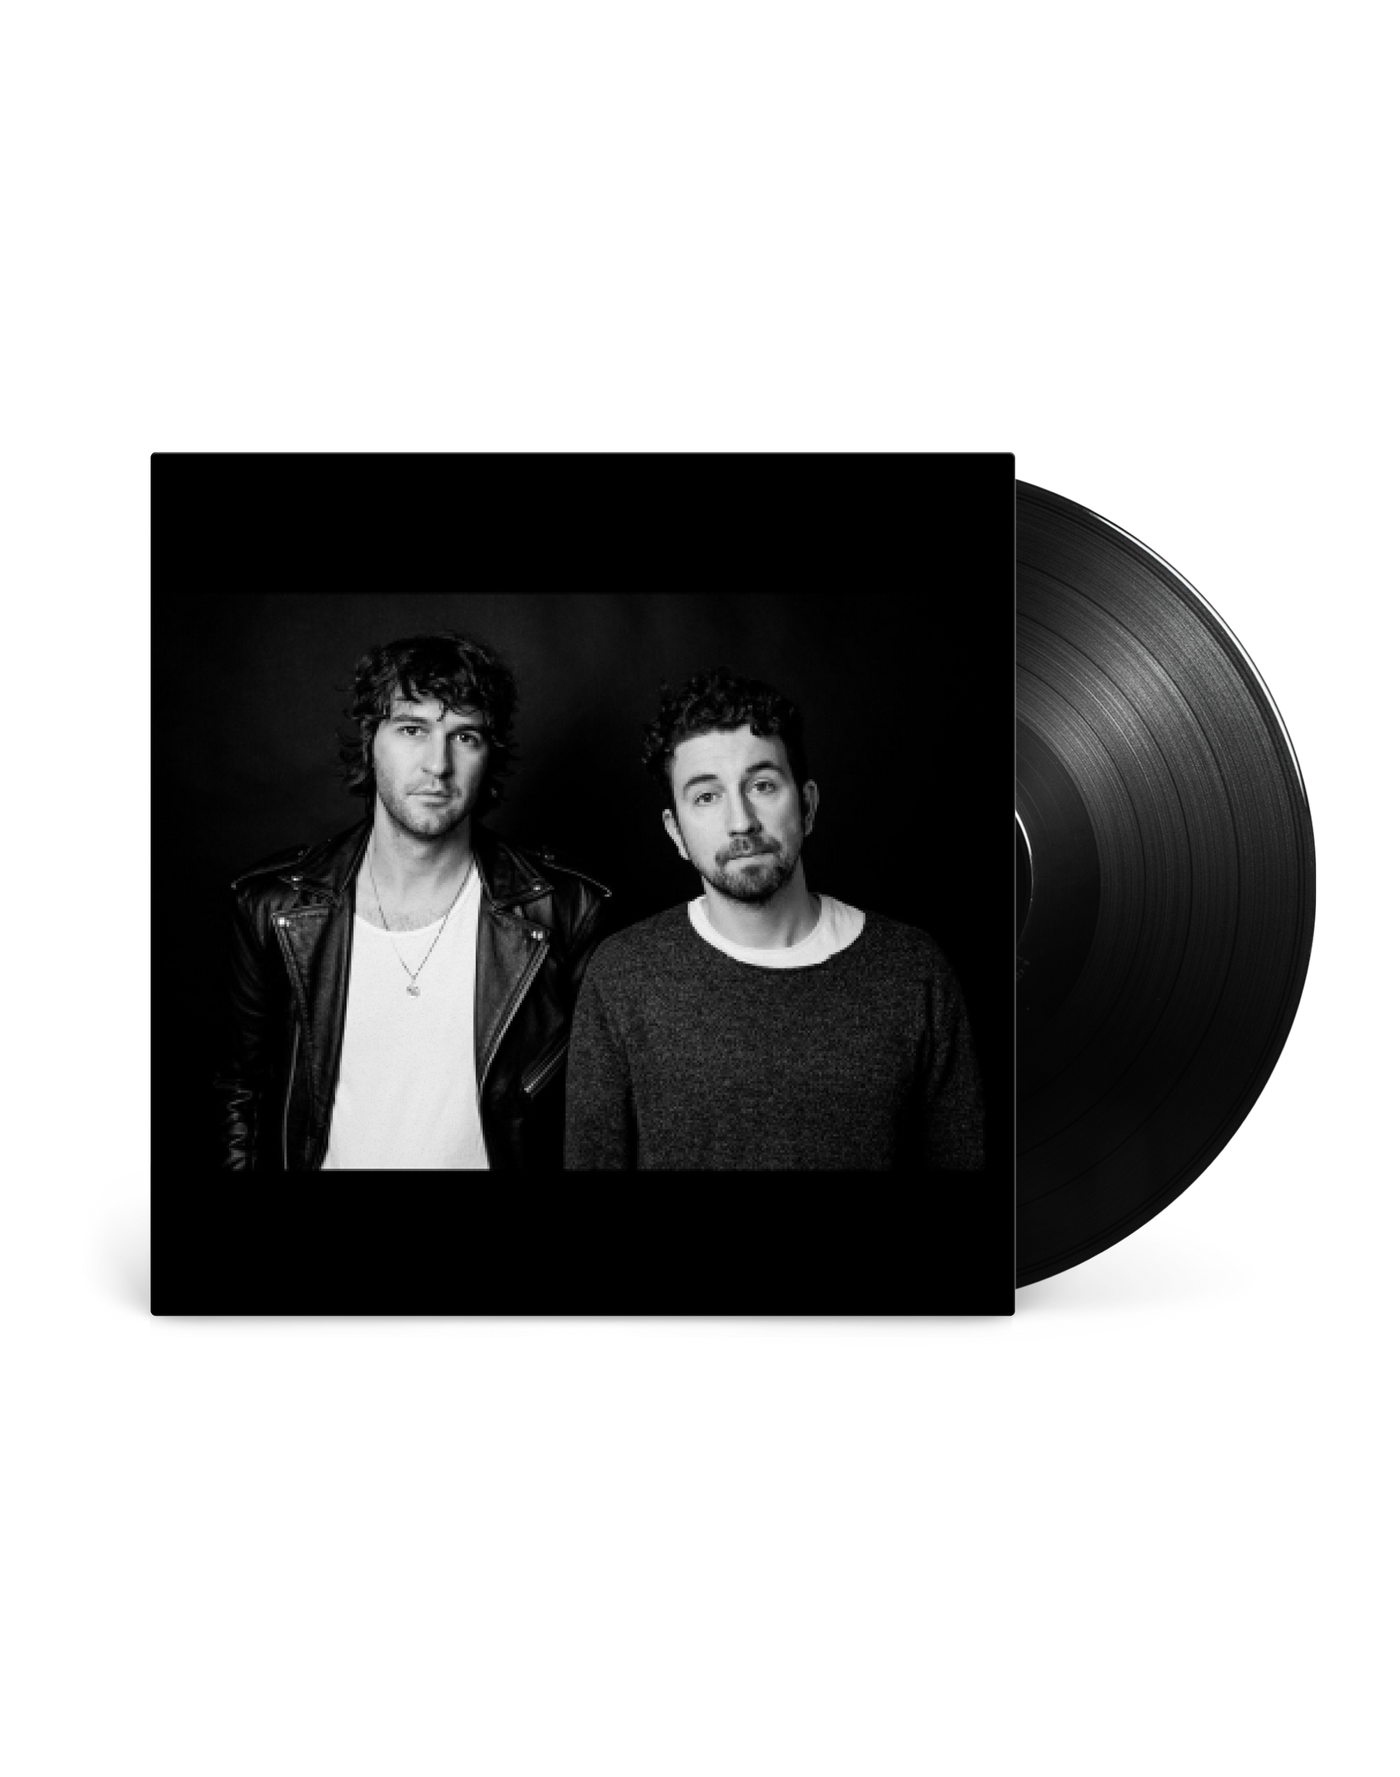 Vinilo 12” - Japandroids Near to the Wild Heart of Life